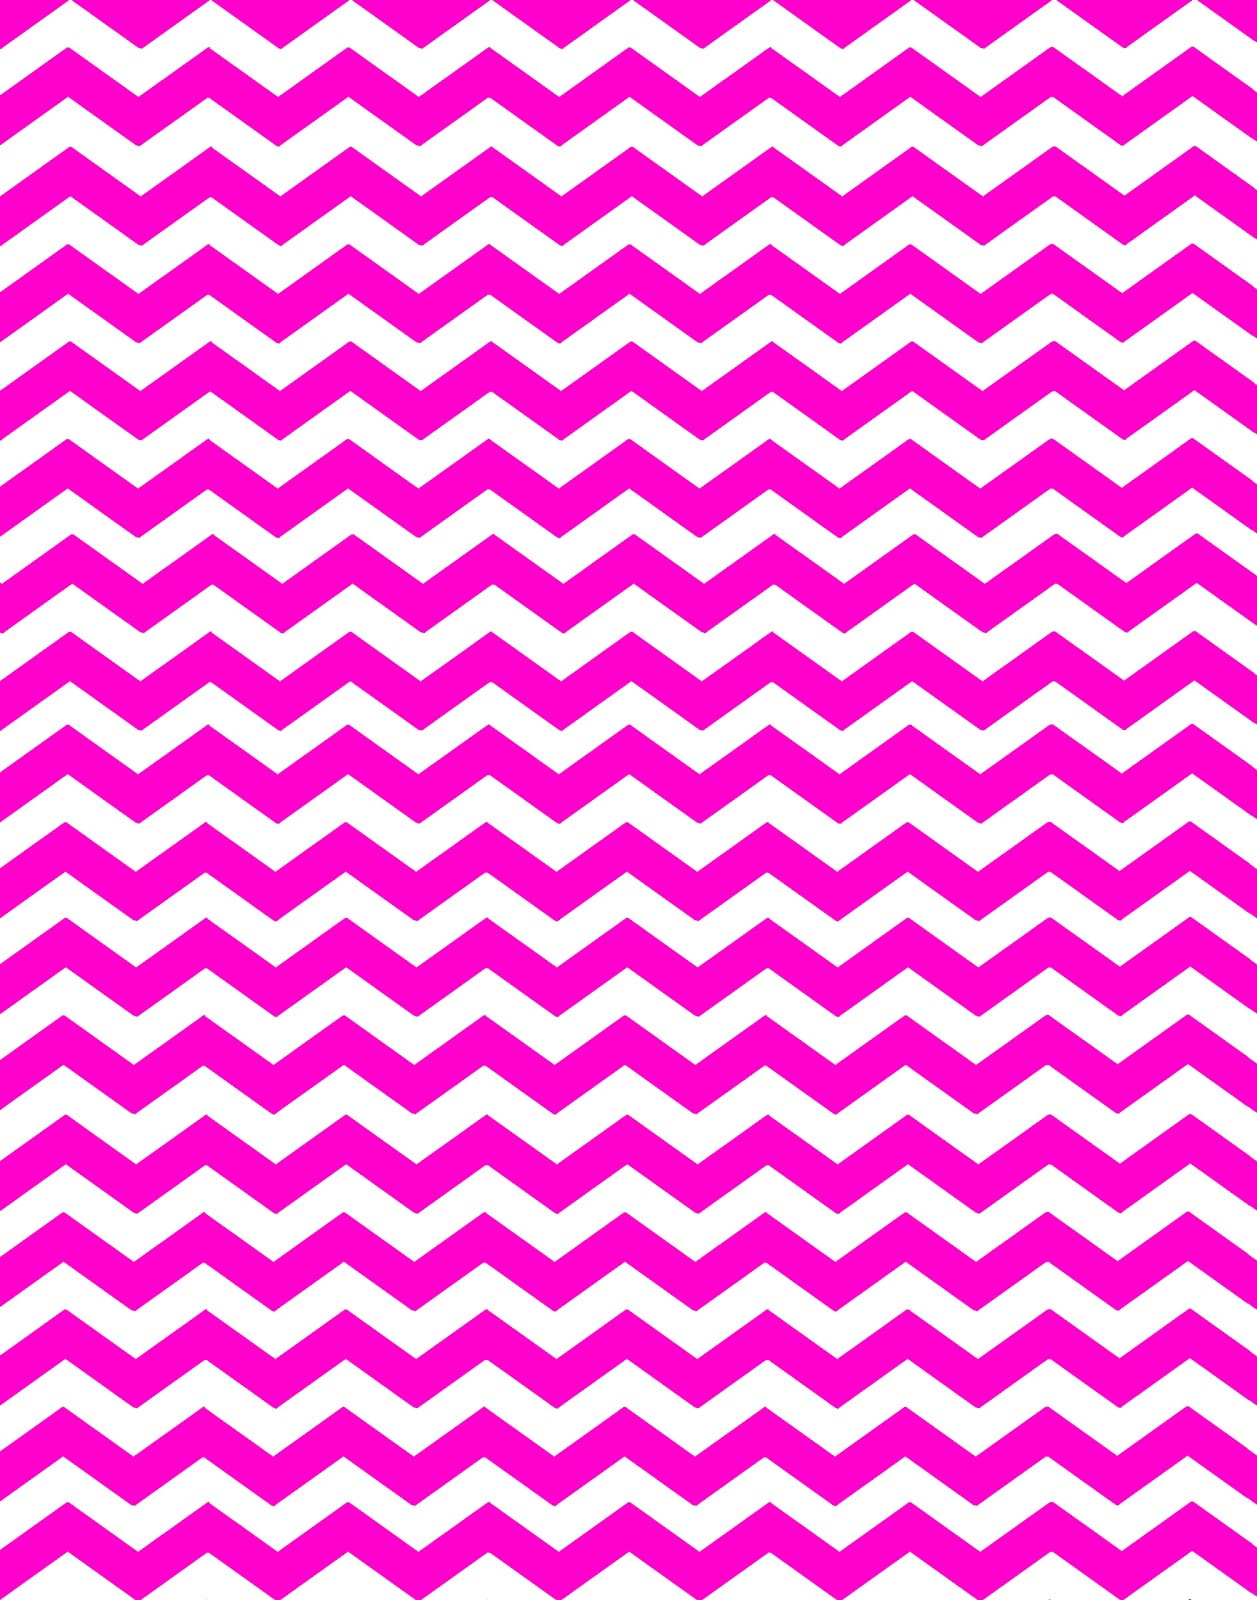 New Colors Chevron Background Patterns